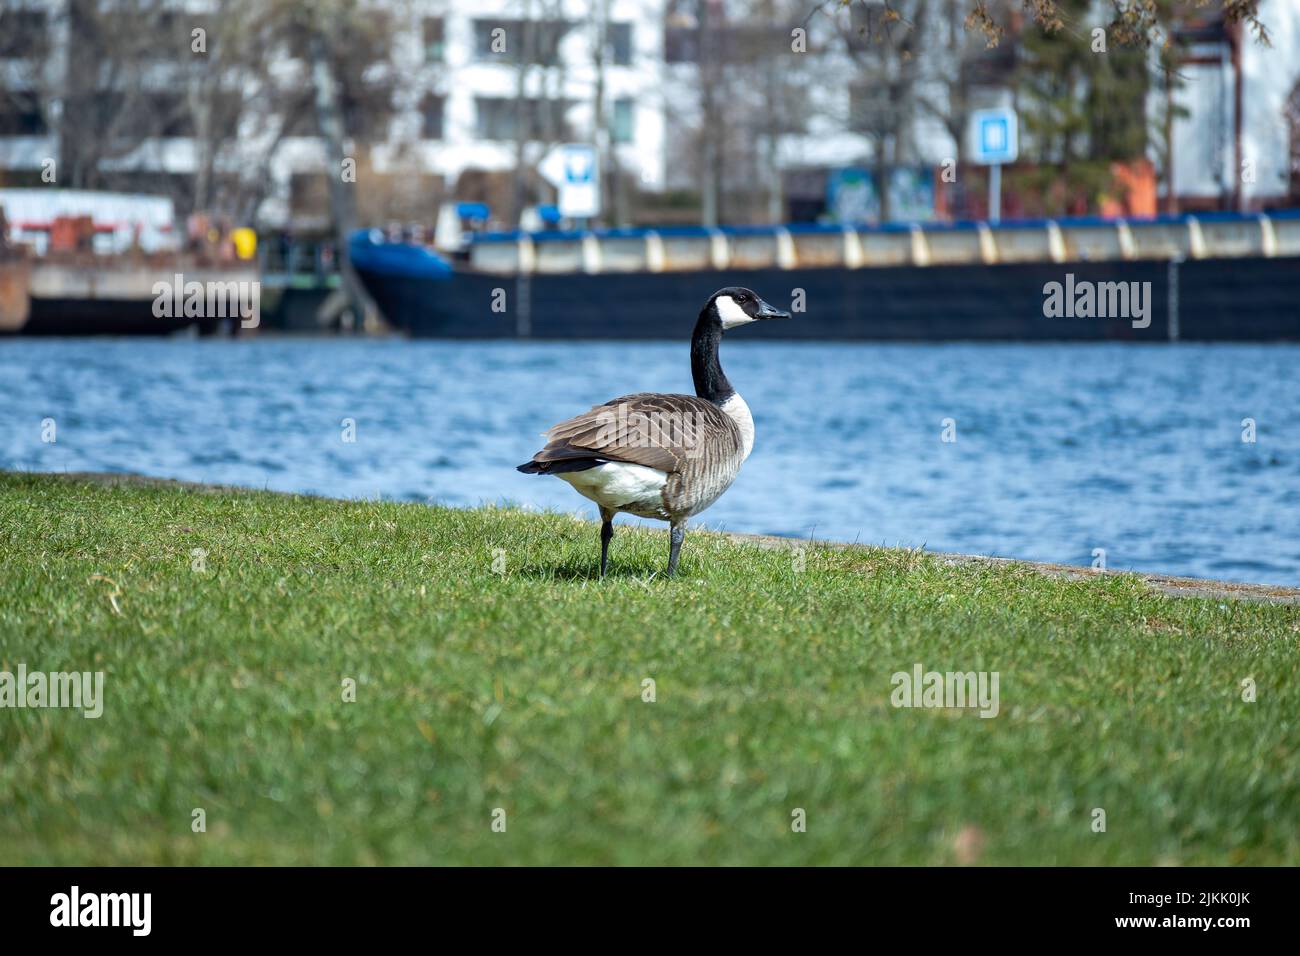 A shallow focus shot of a Canada Goose standing on the grass near the seashore Stock Photo